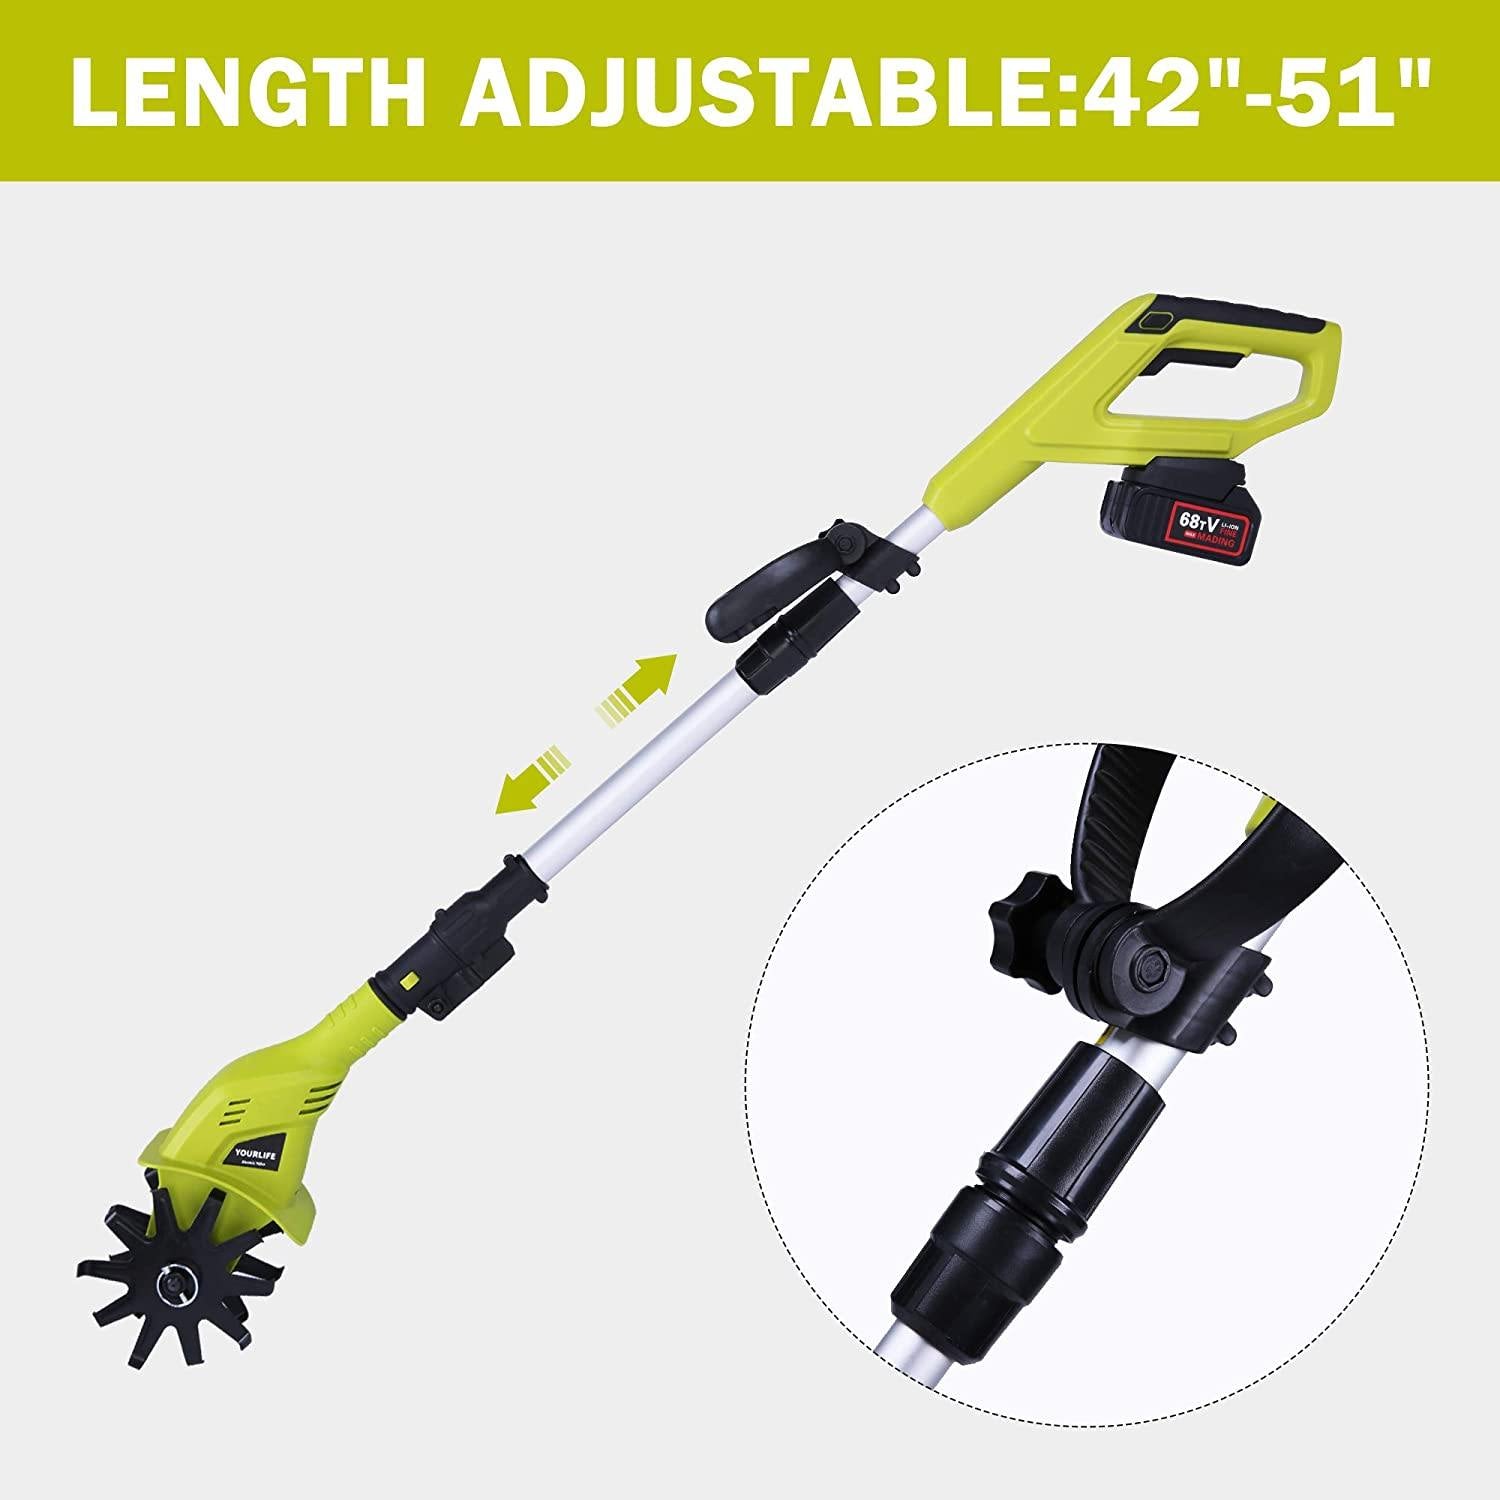 20V Cordless Electric Garden Tiller/Cultivator Height Adjustable with 2.0 Ah Lithium Battery and Charger -Chartreuse - Bosonshop